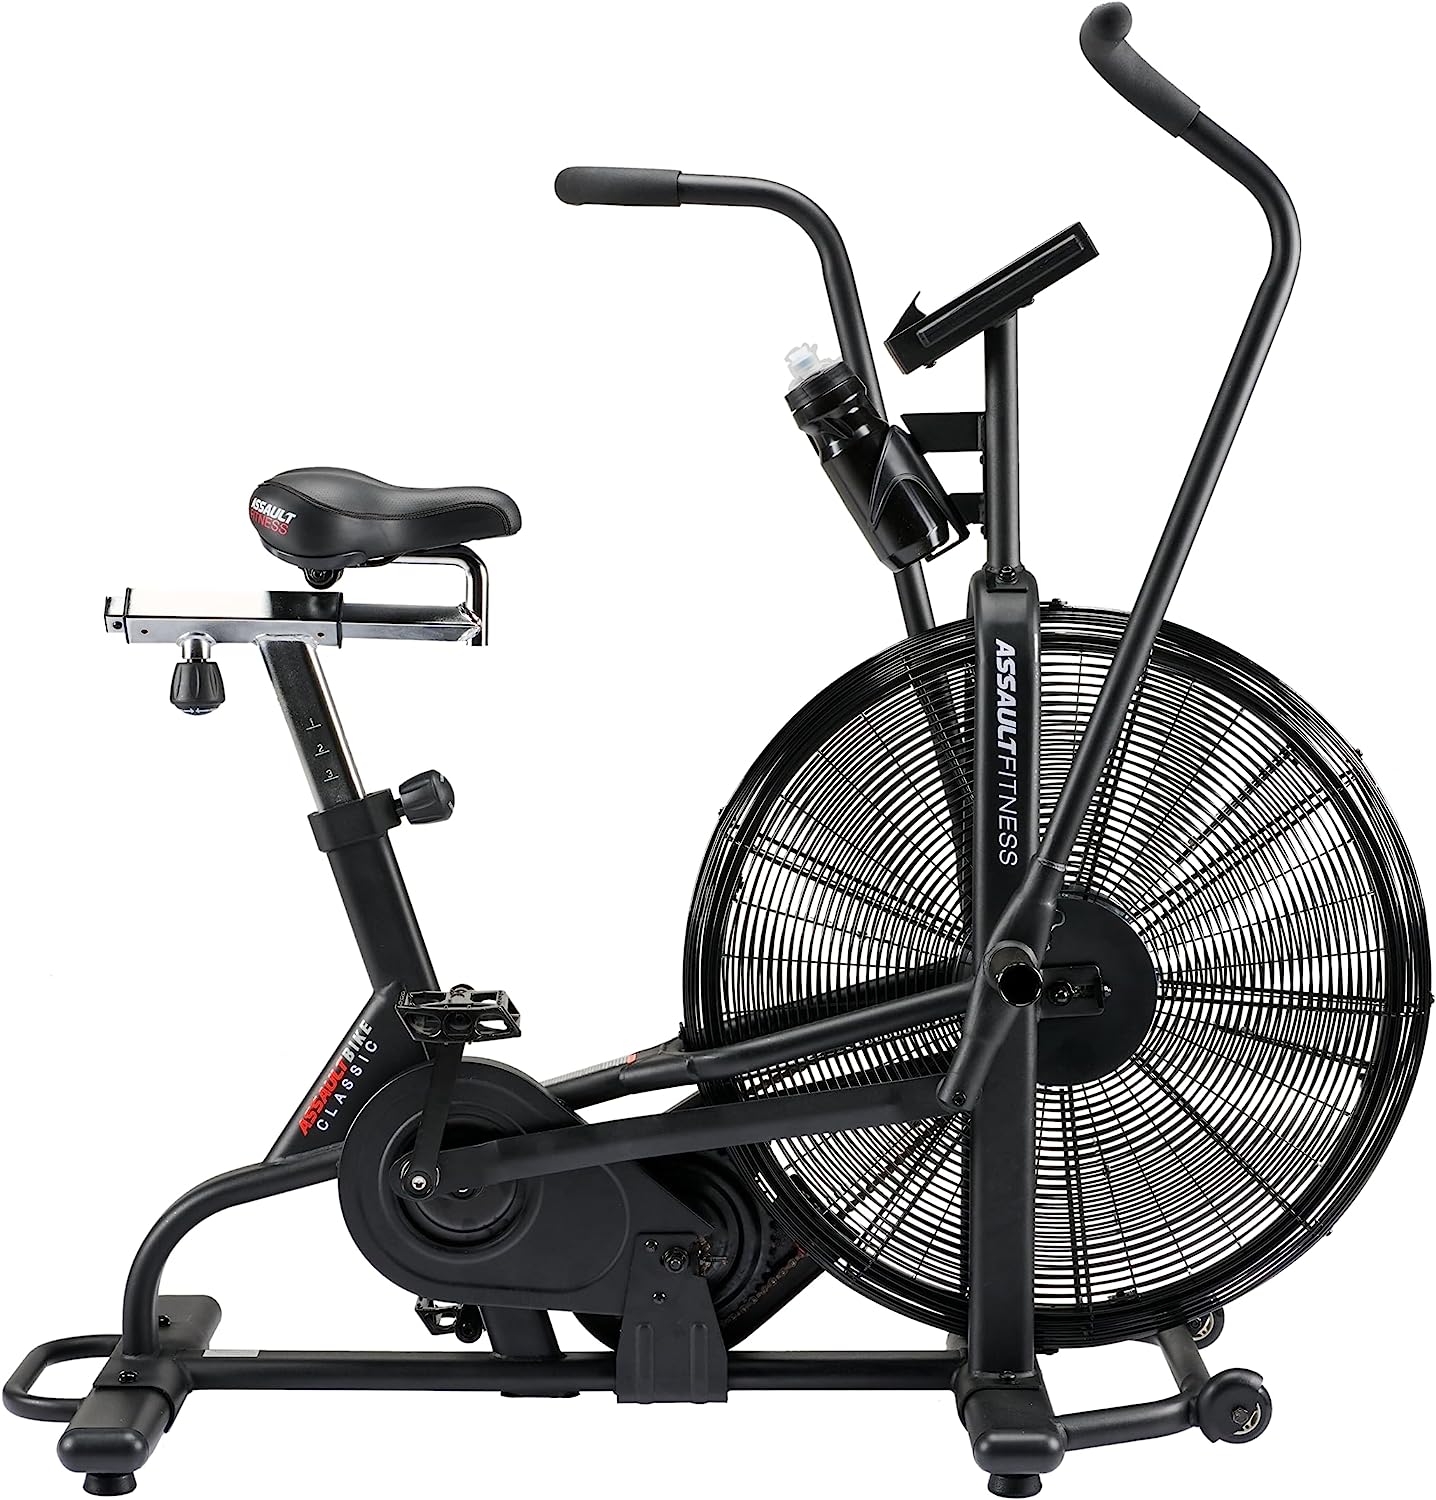 Assault Fitness Air Bike by Life core - image 3 of 16